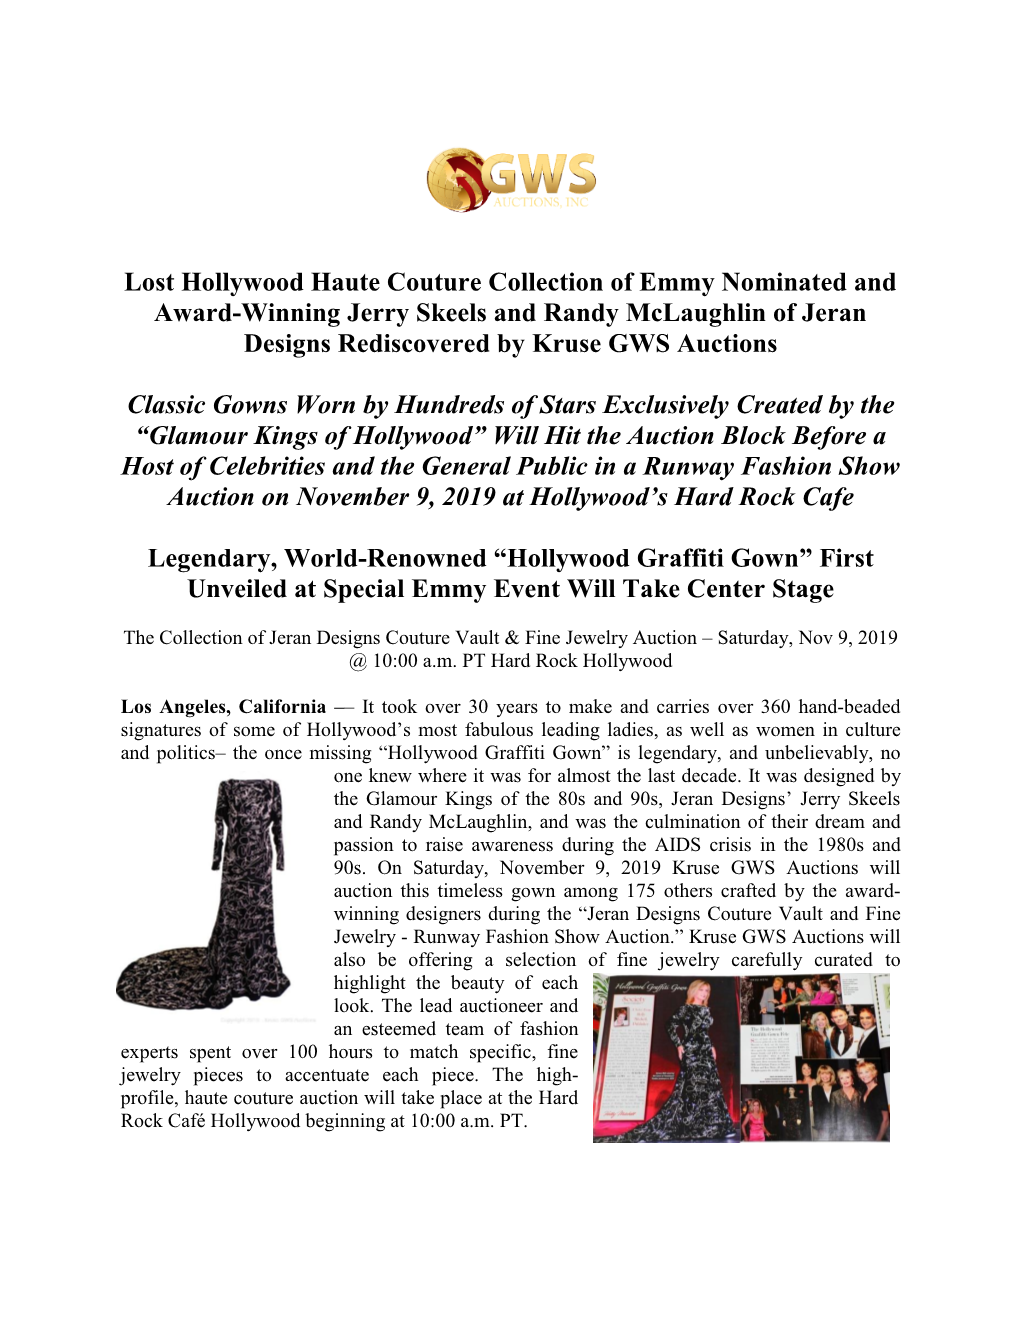 Lost Hollywood Haute Couture Collection of Emmy Nominated and Award-Winning Jerry Skeels and Randy Mclaughlin of Jeran Designs Rediscovered by Kruse GWS Auctions